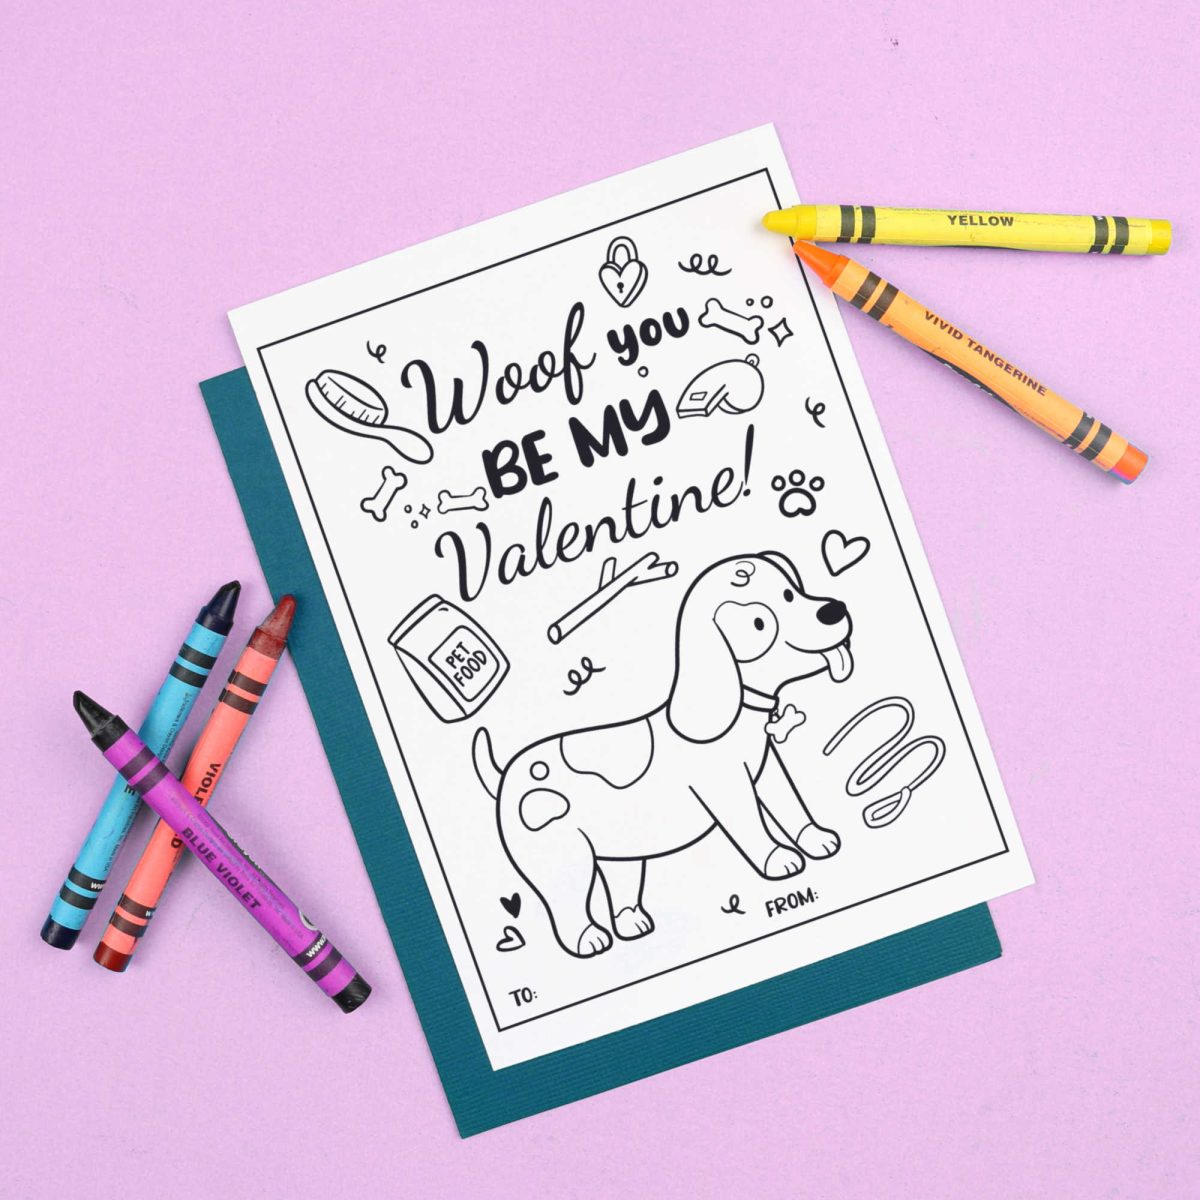 Kitten coloring page valentine card with a blue envelope near crayons